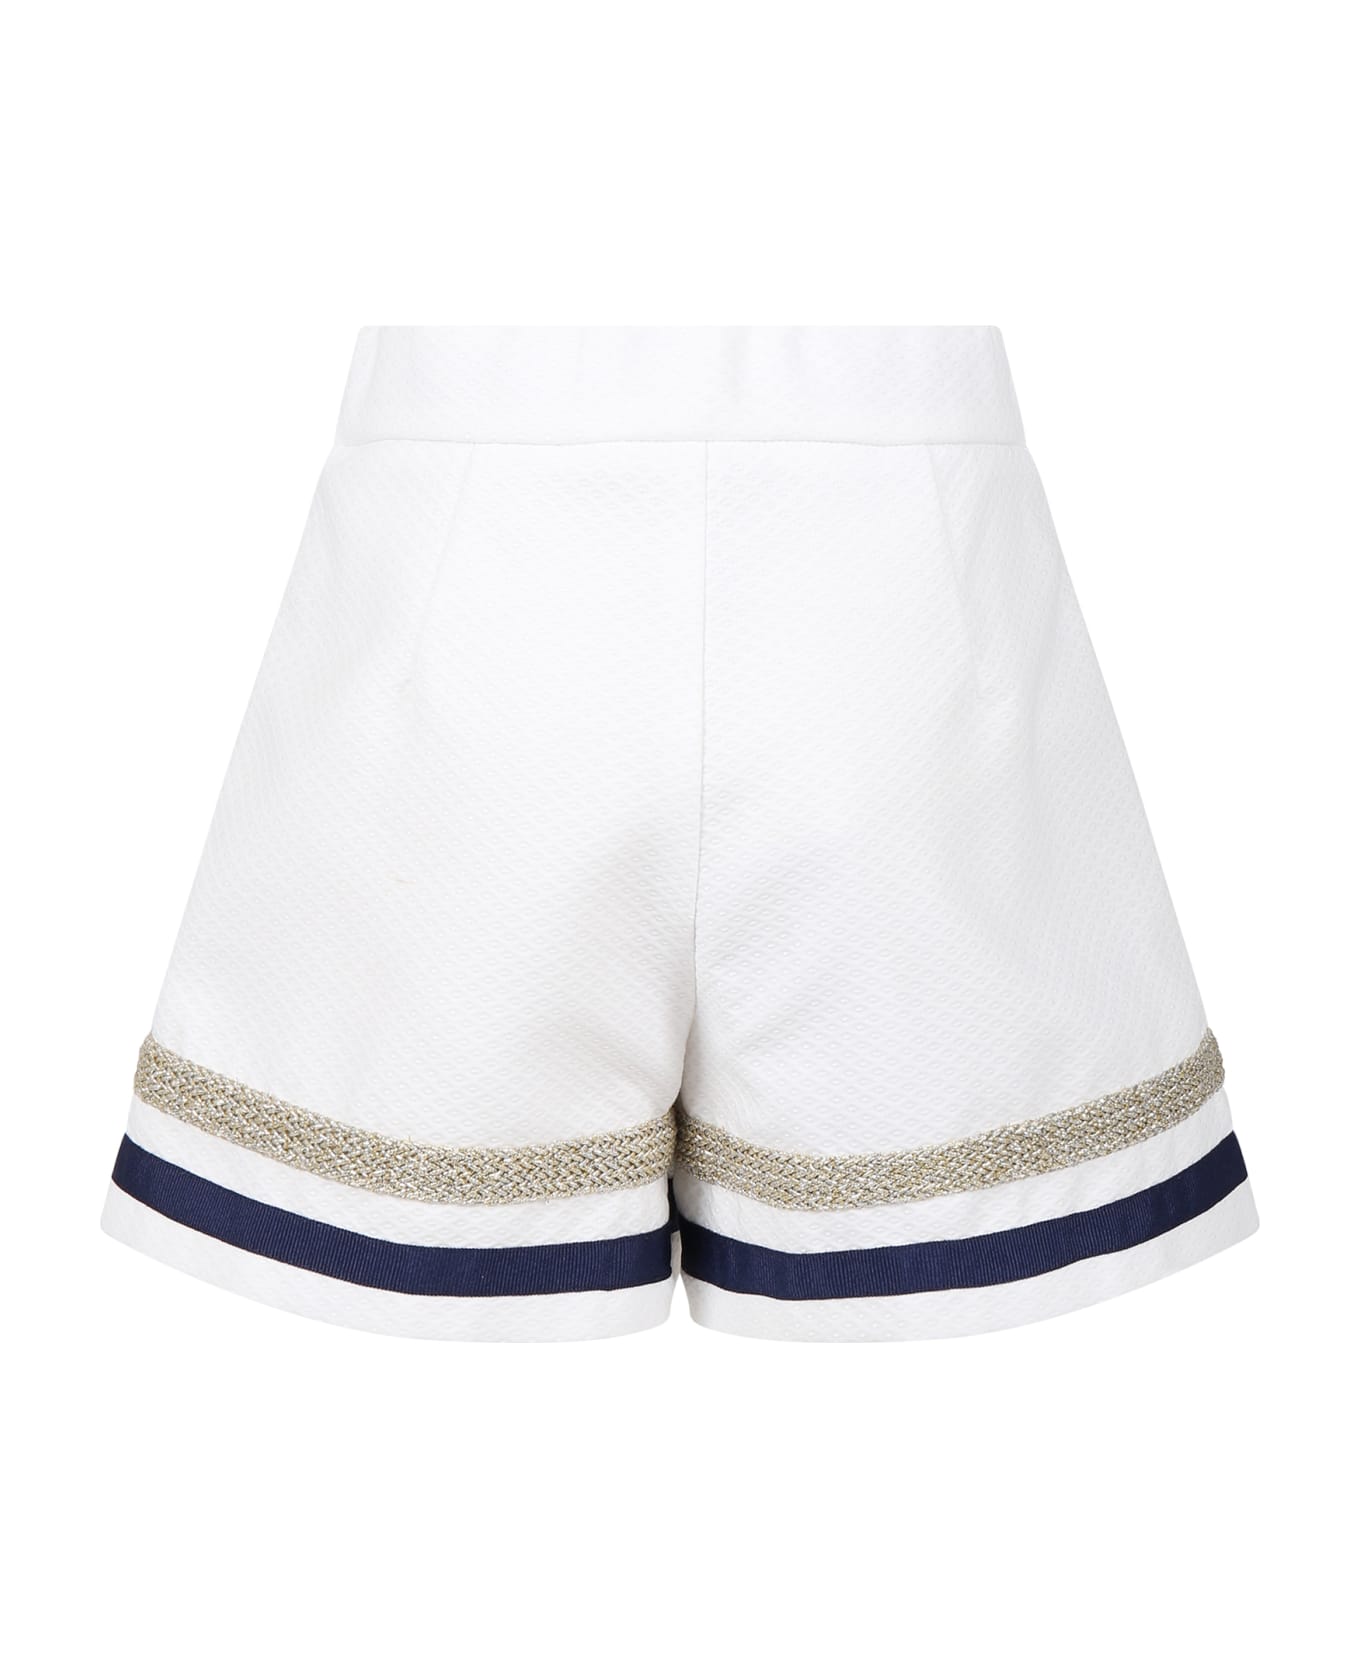 Genny White Shorts For Girl With Blue And Lurex Details - White ボトムス